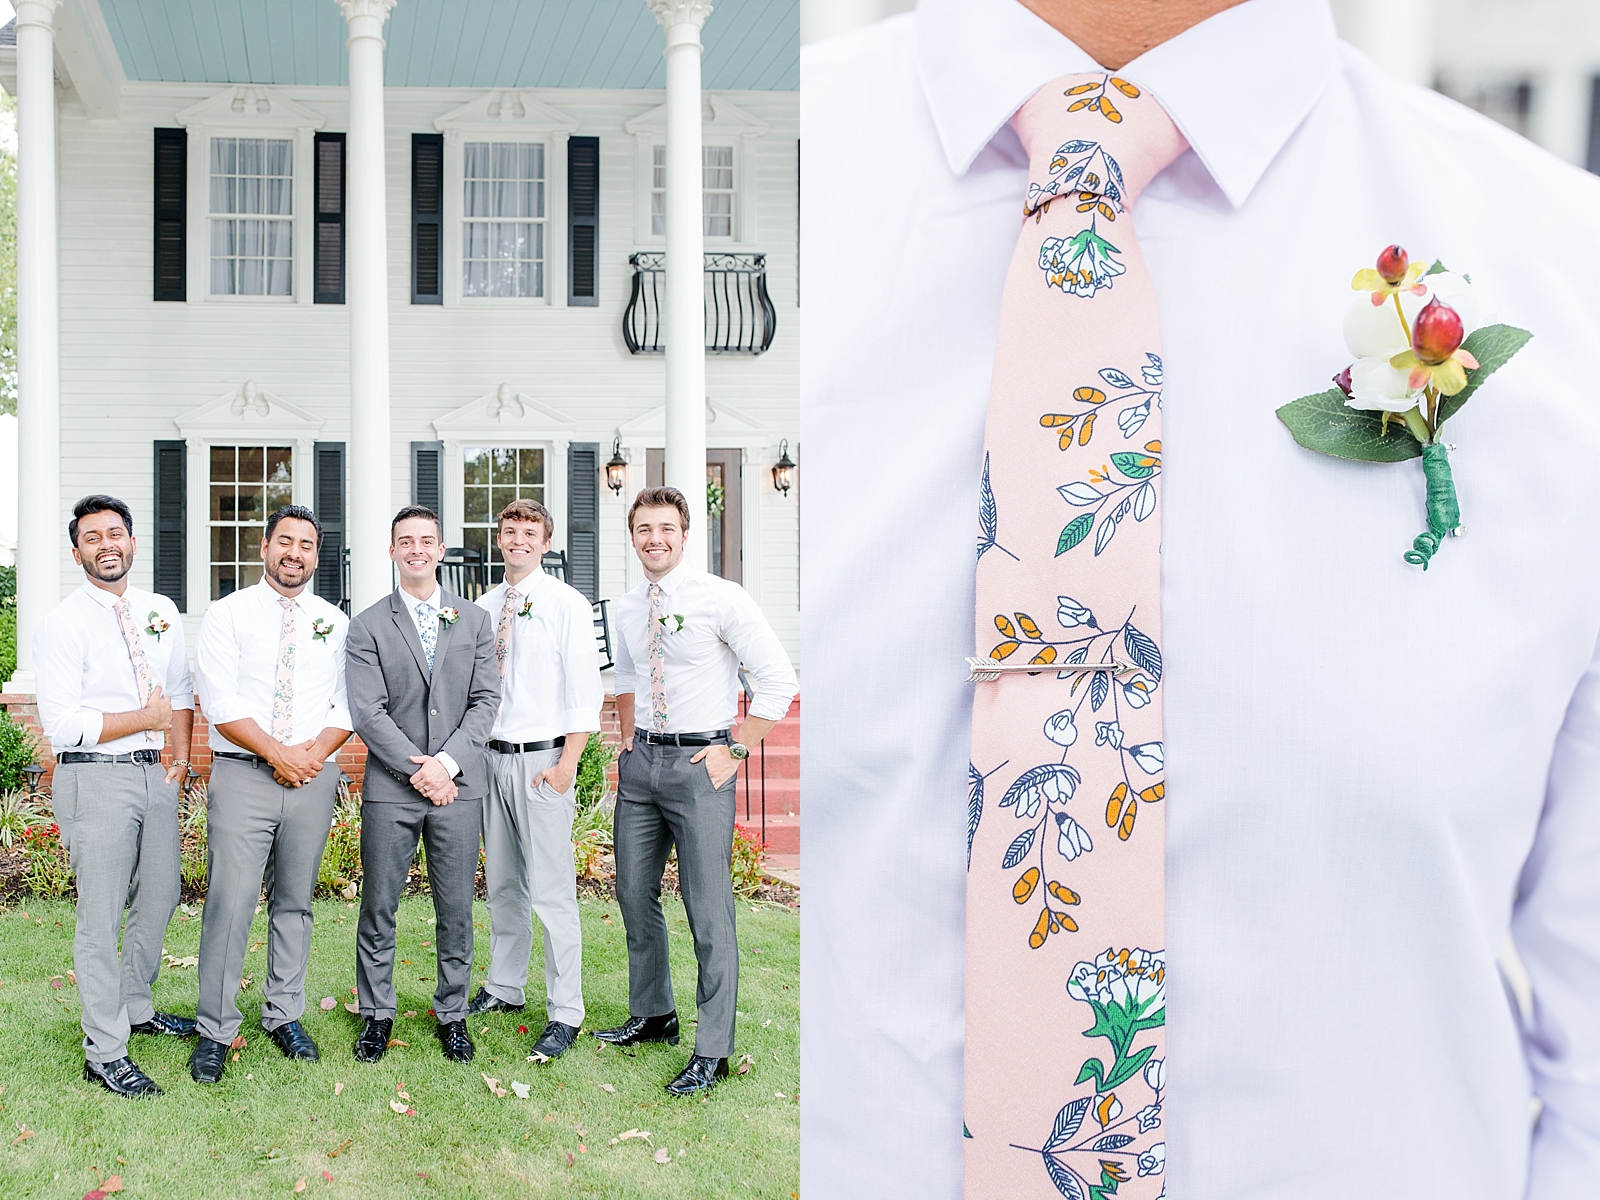 Dahlonega Wedding Venue Groomsmen with the groom and detail of a groomsmen's pink and blue floral tie Photo